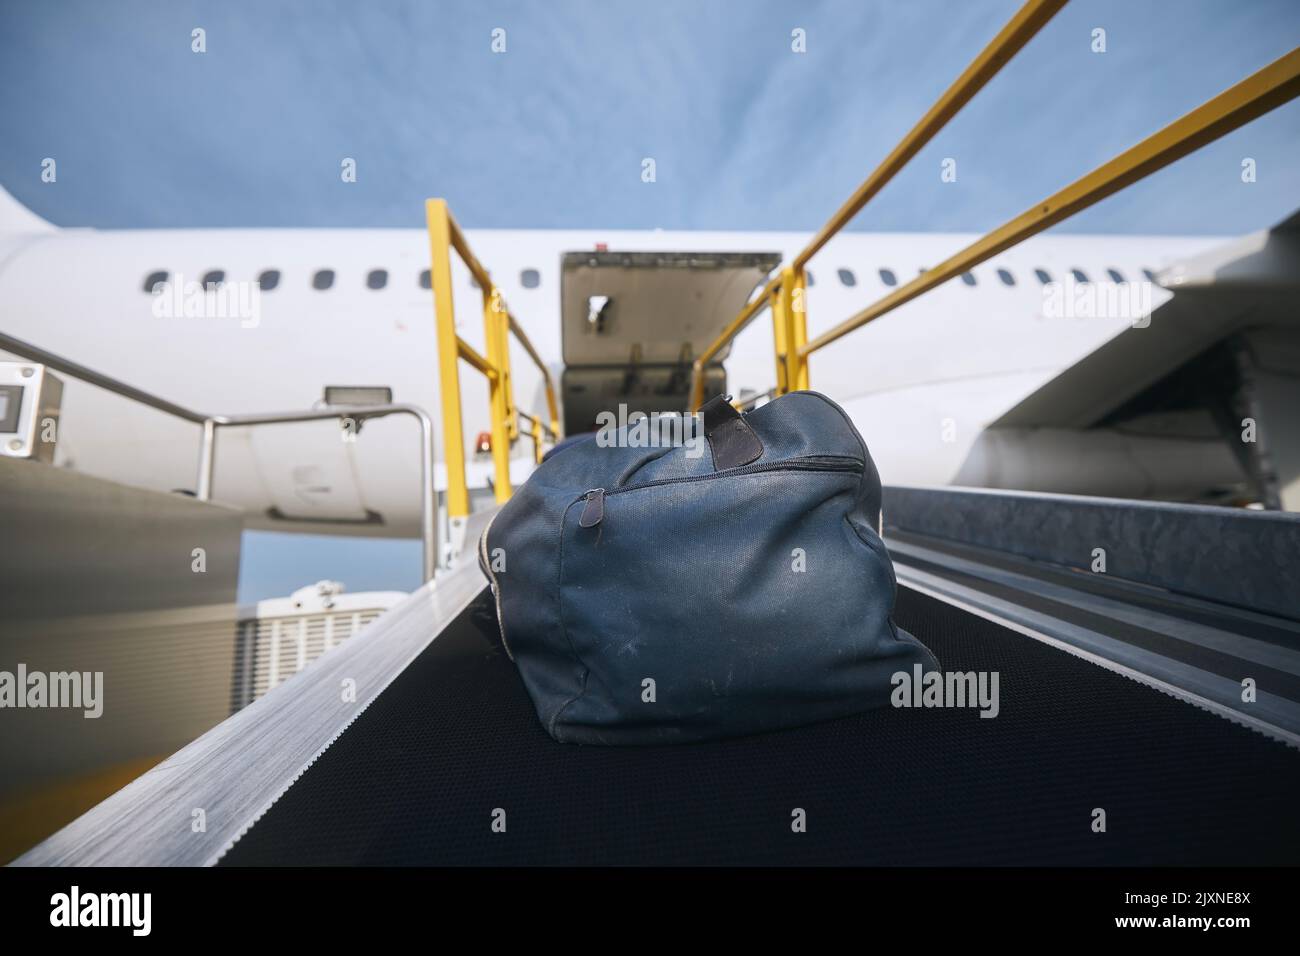 Loading of luggage to airplane. Blue bag on conveyor belt at airport. Stock Photo